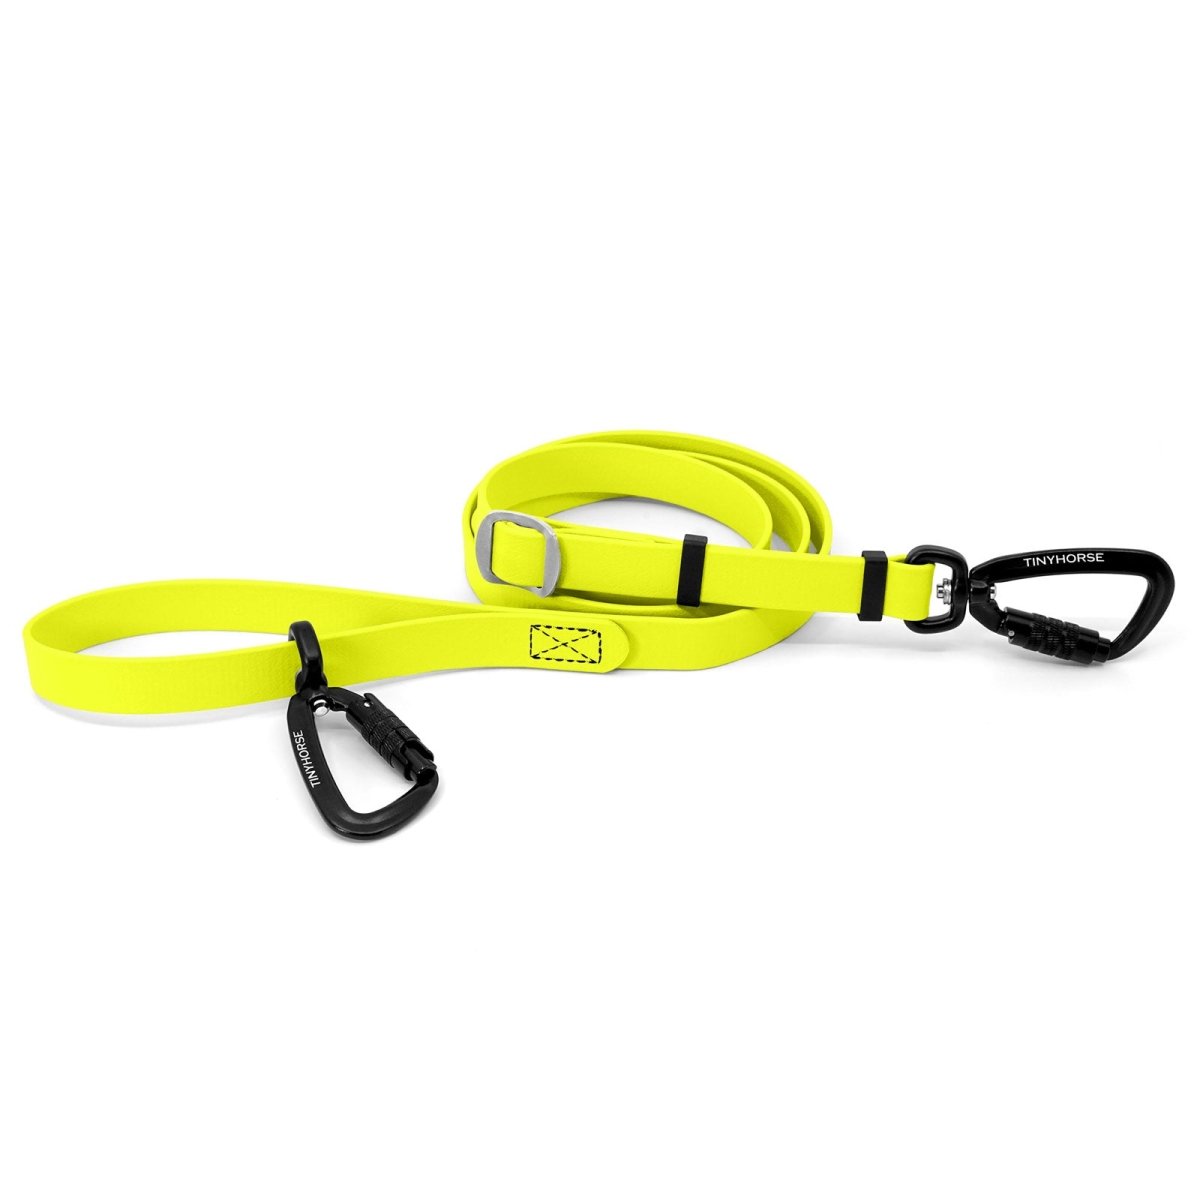 An adjustable neon yellow-coloured Lead-All Pro Extra made of BioThane with 2 auto-locking carabiners